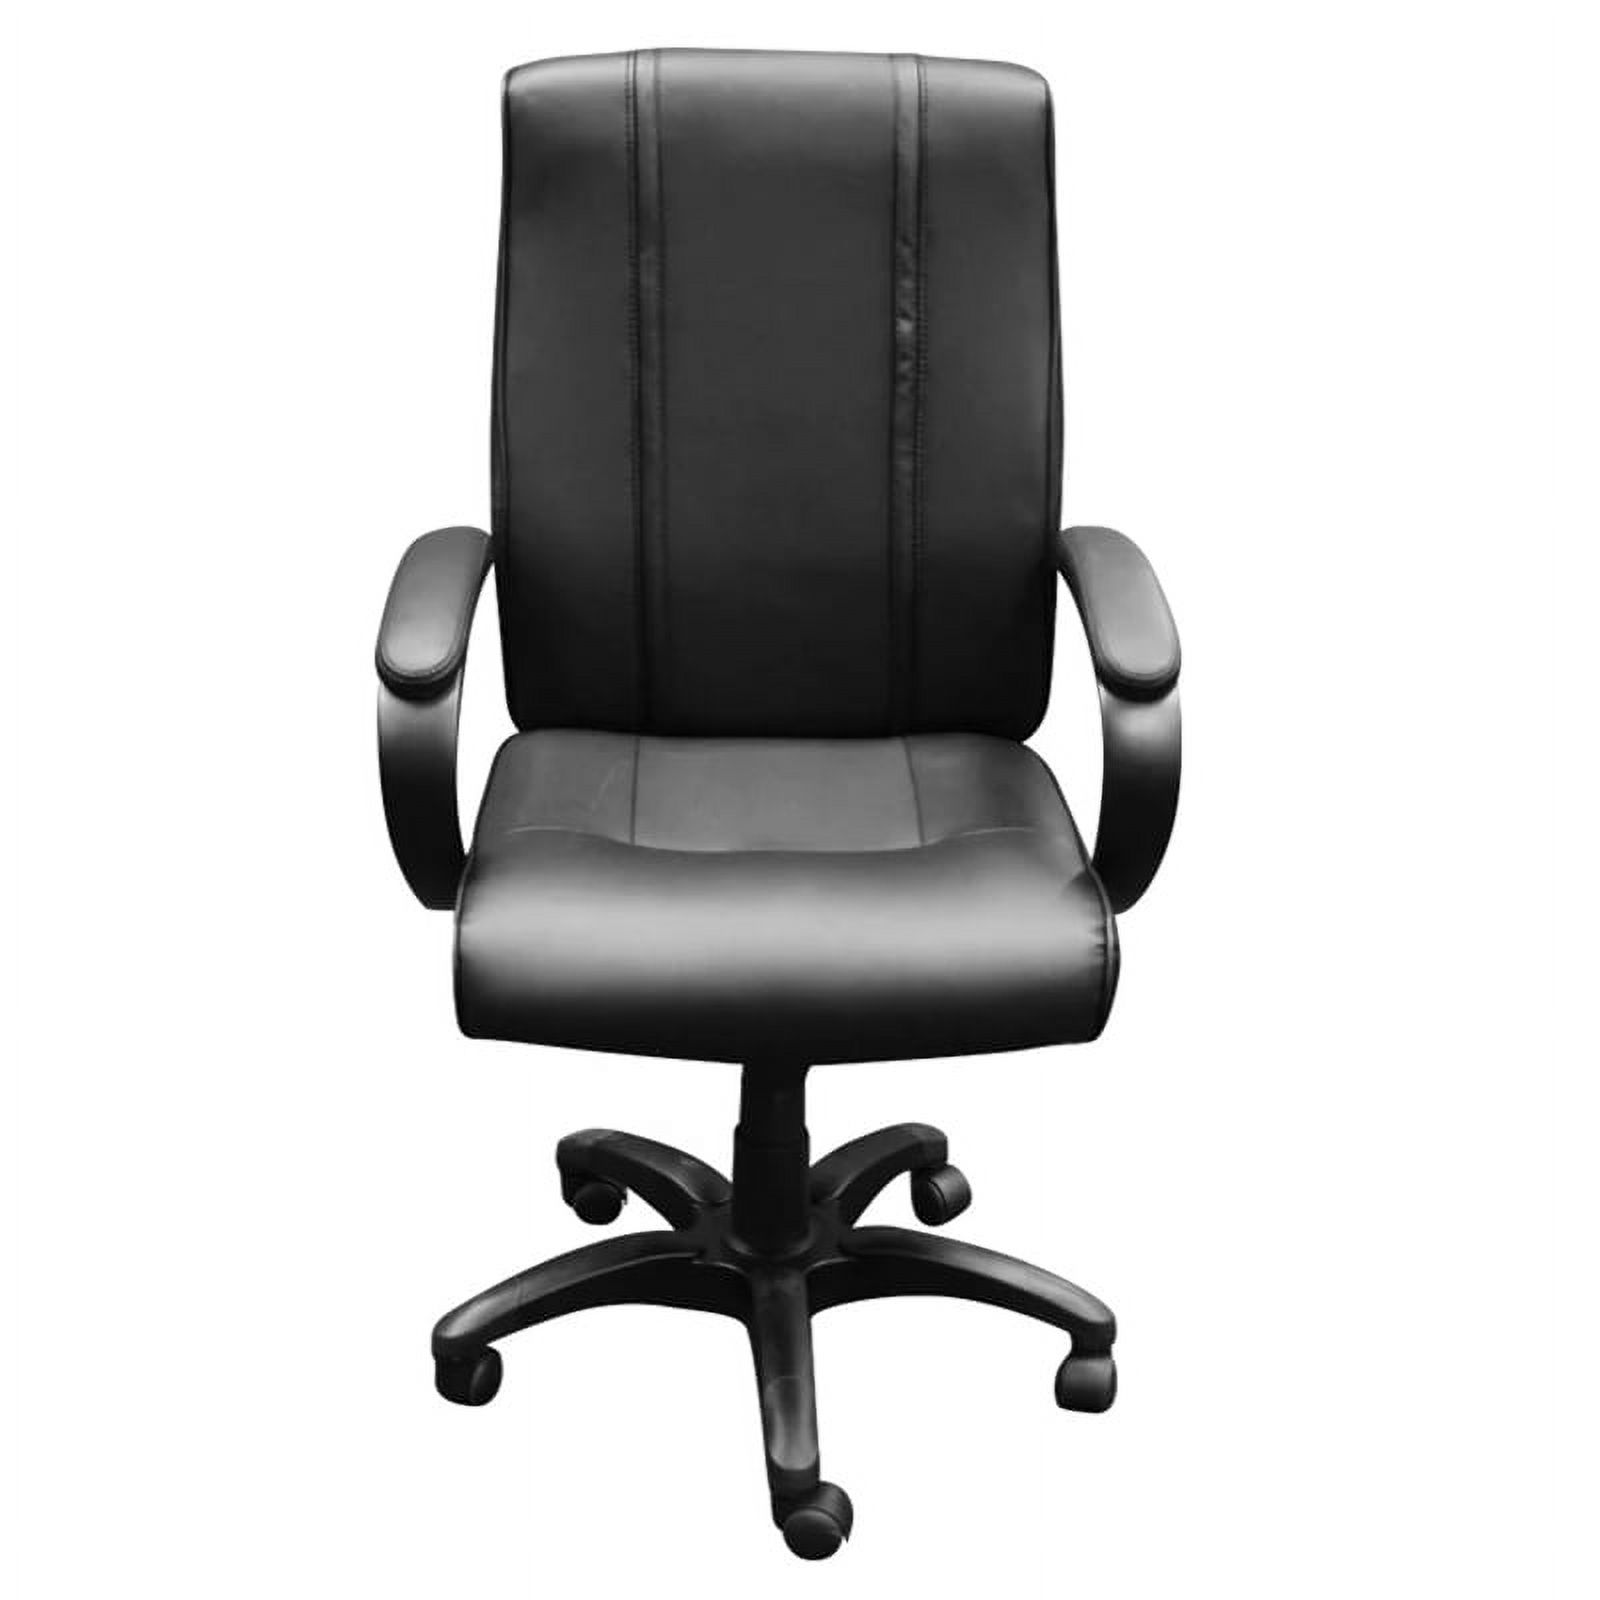 Houston Texans Office Chair 1000 - image 2 of 4